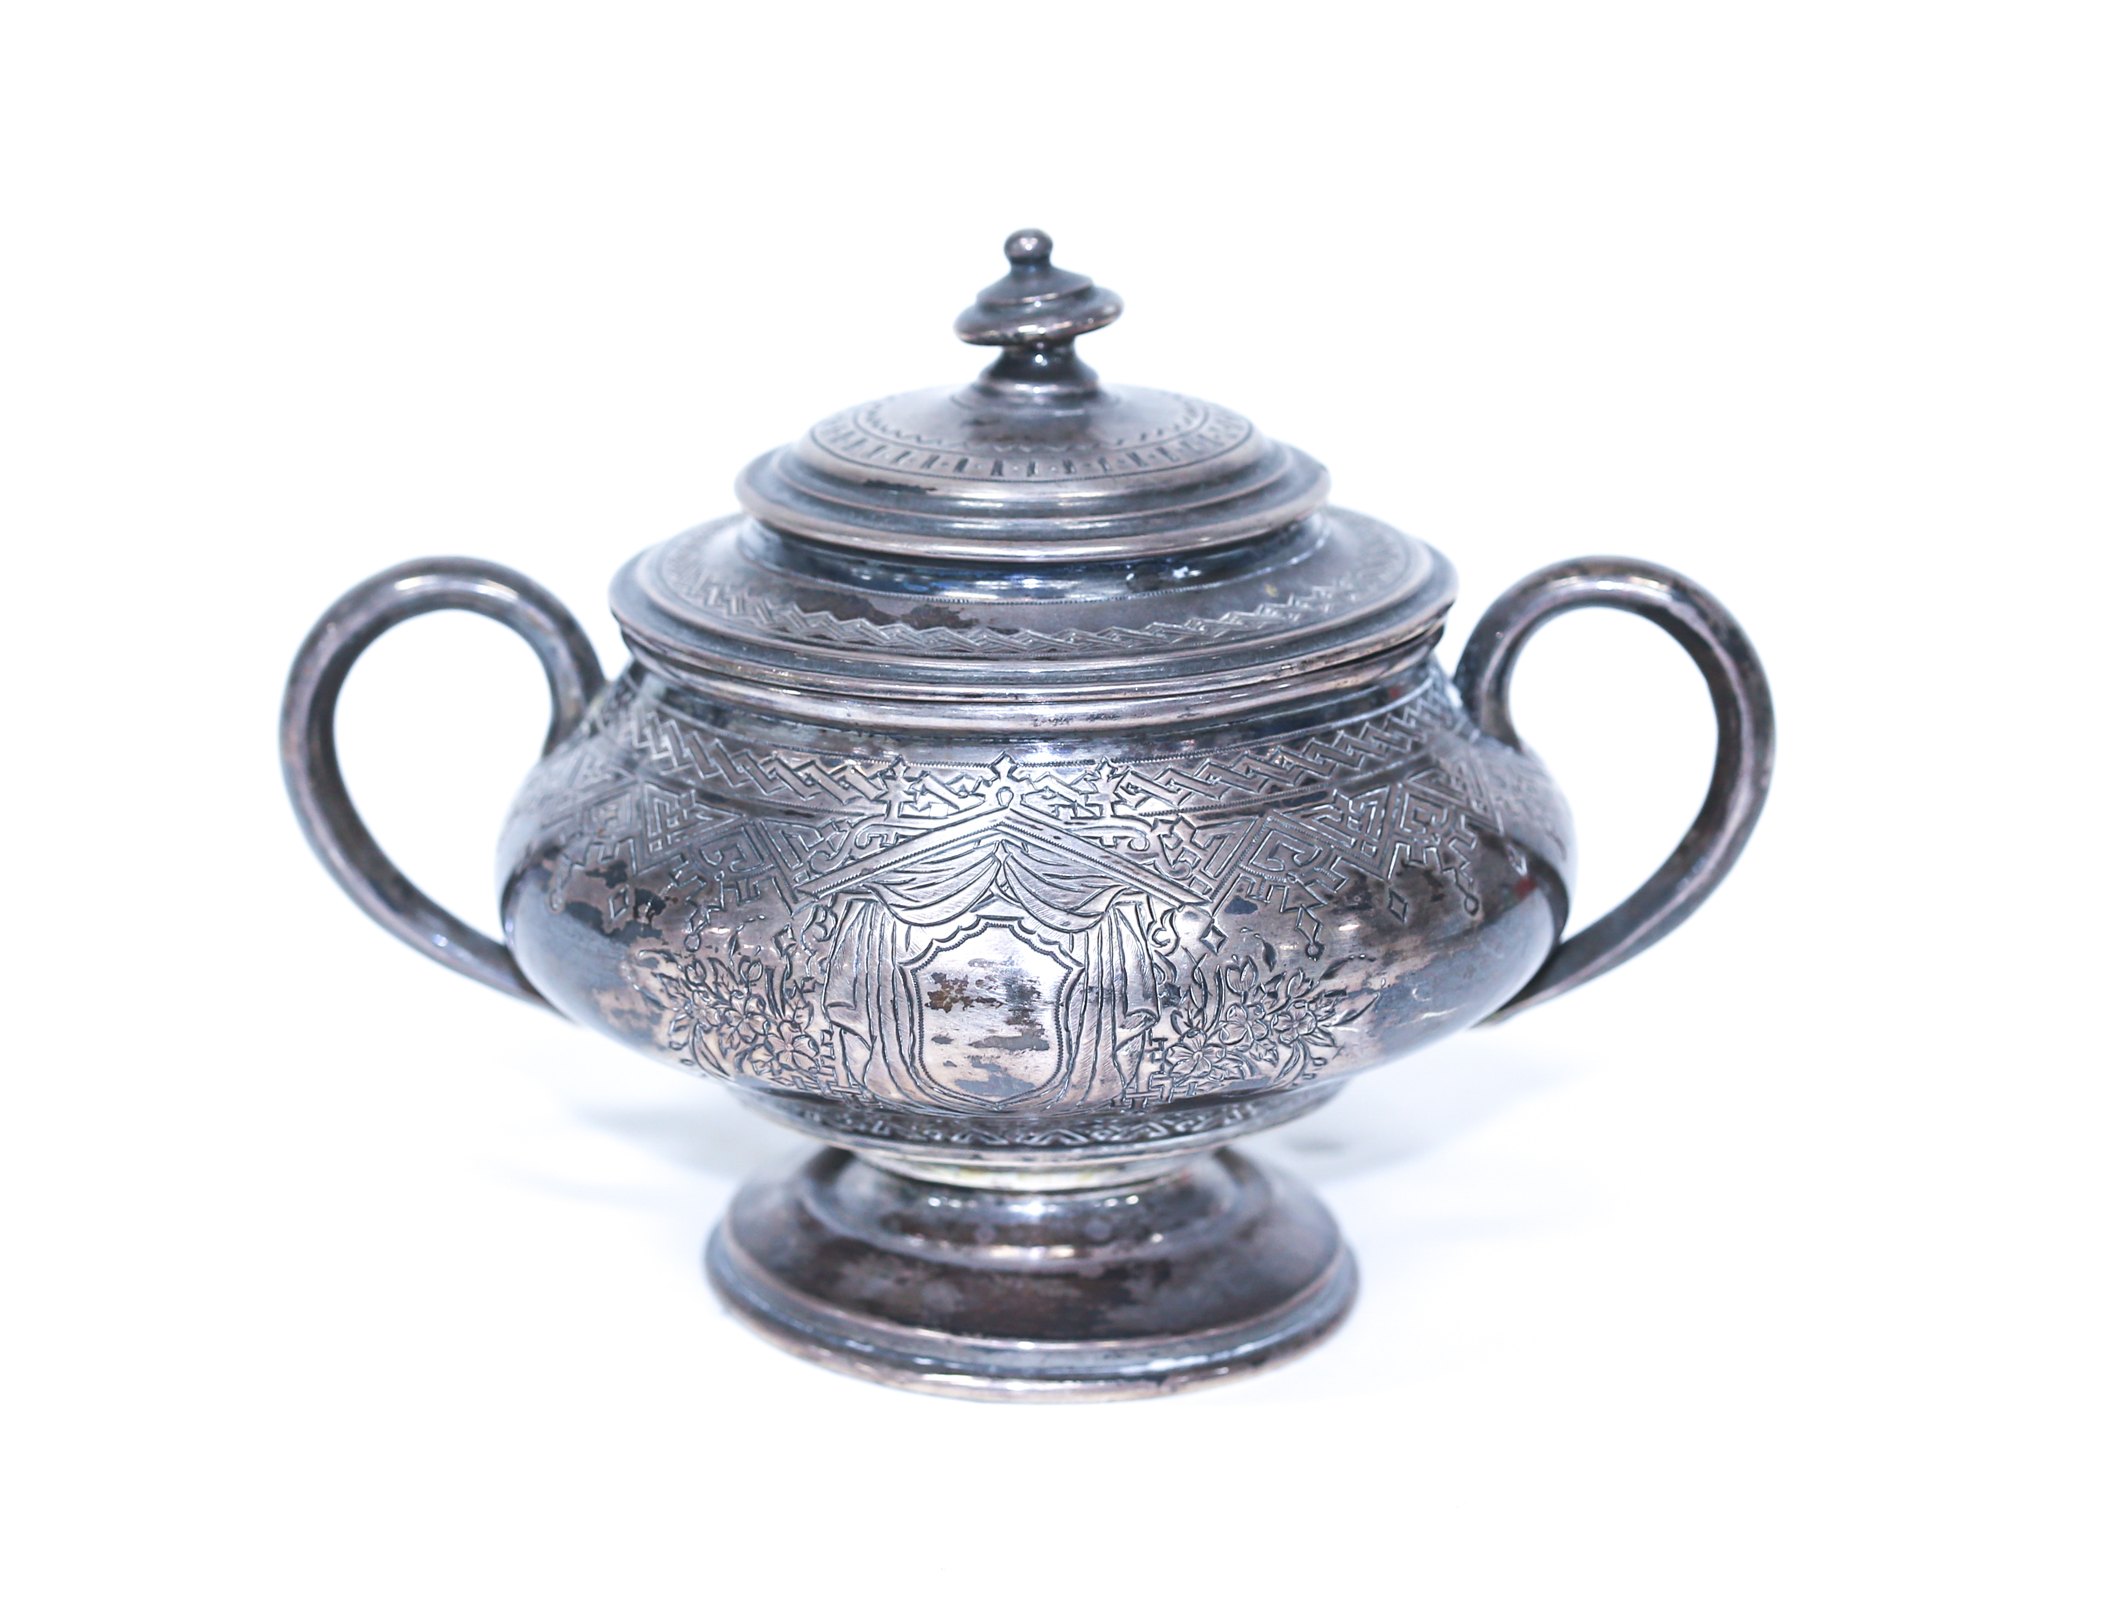 RUSSIAN CHASED SILVER SUGAR BOWL 1885,